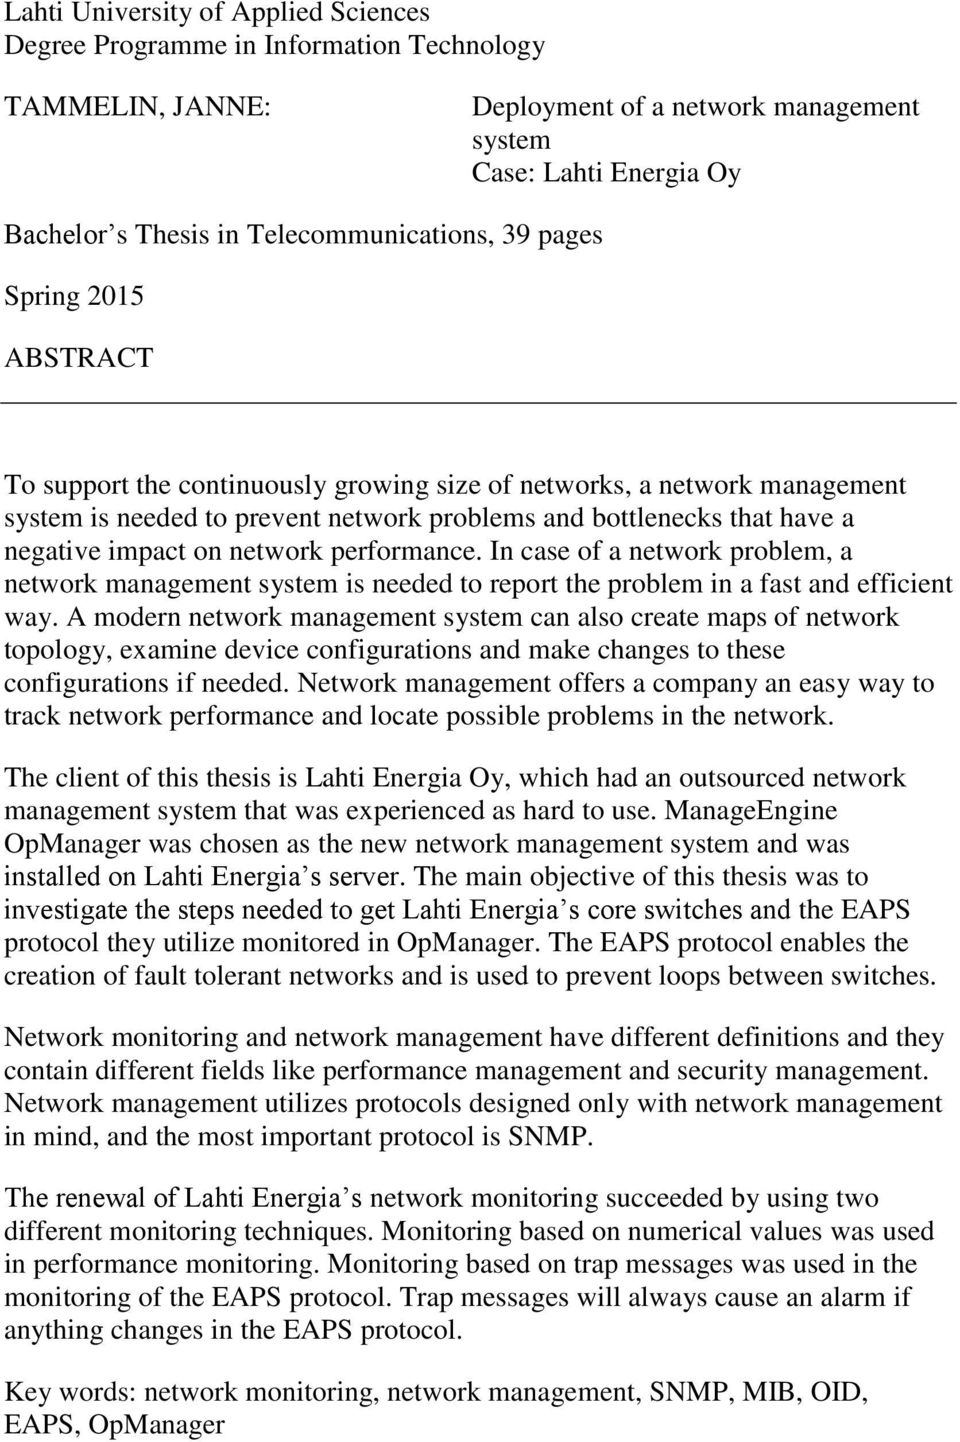 negative impact on network performance. In case of a network problem, a network management system is needed to report the problem in a fast and efficient way.